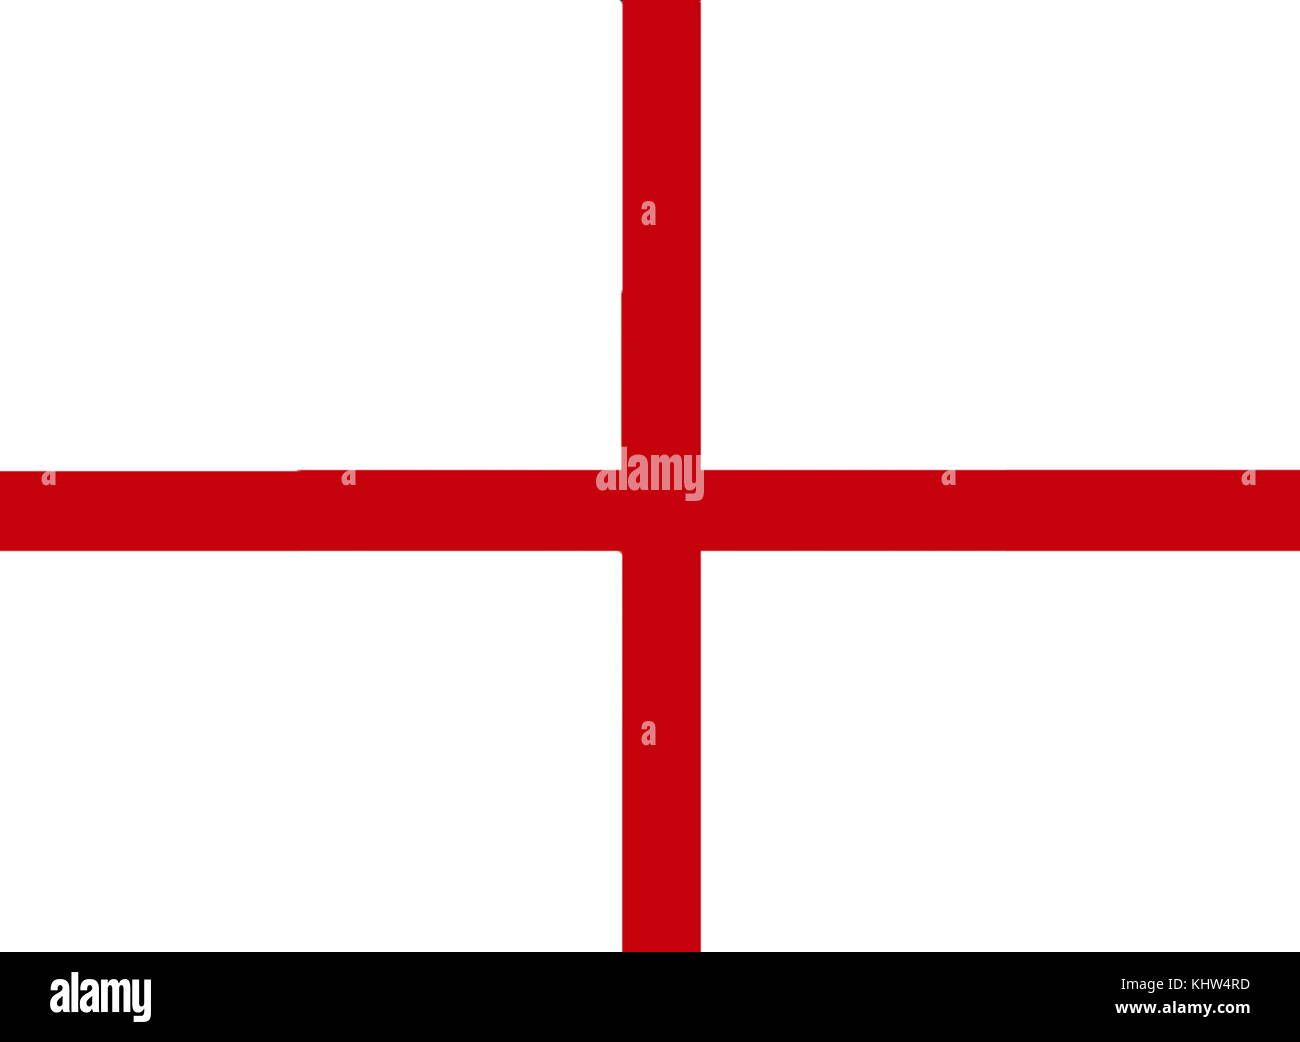 Illustration depicting the Flag of England derived from St. George's Cross. The association of the red cross as an emblem of England can be traced back to the Middle Ages. Dated 20th Century Stock Photo